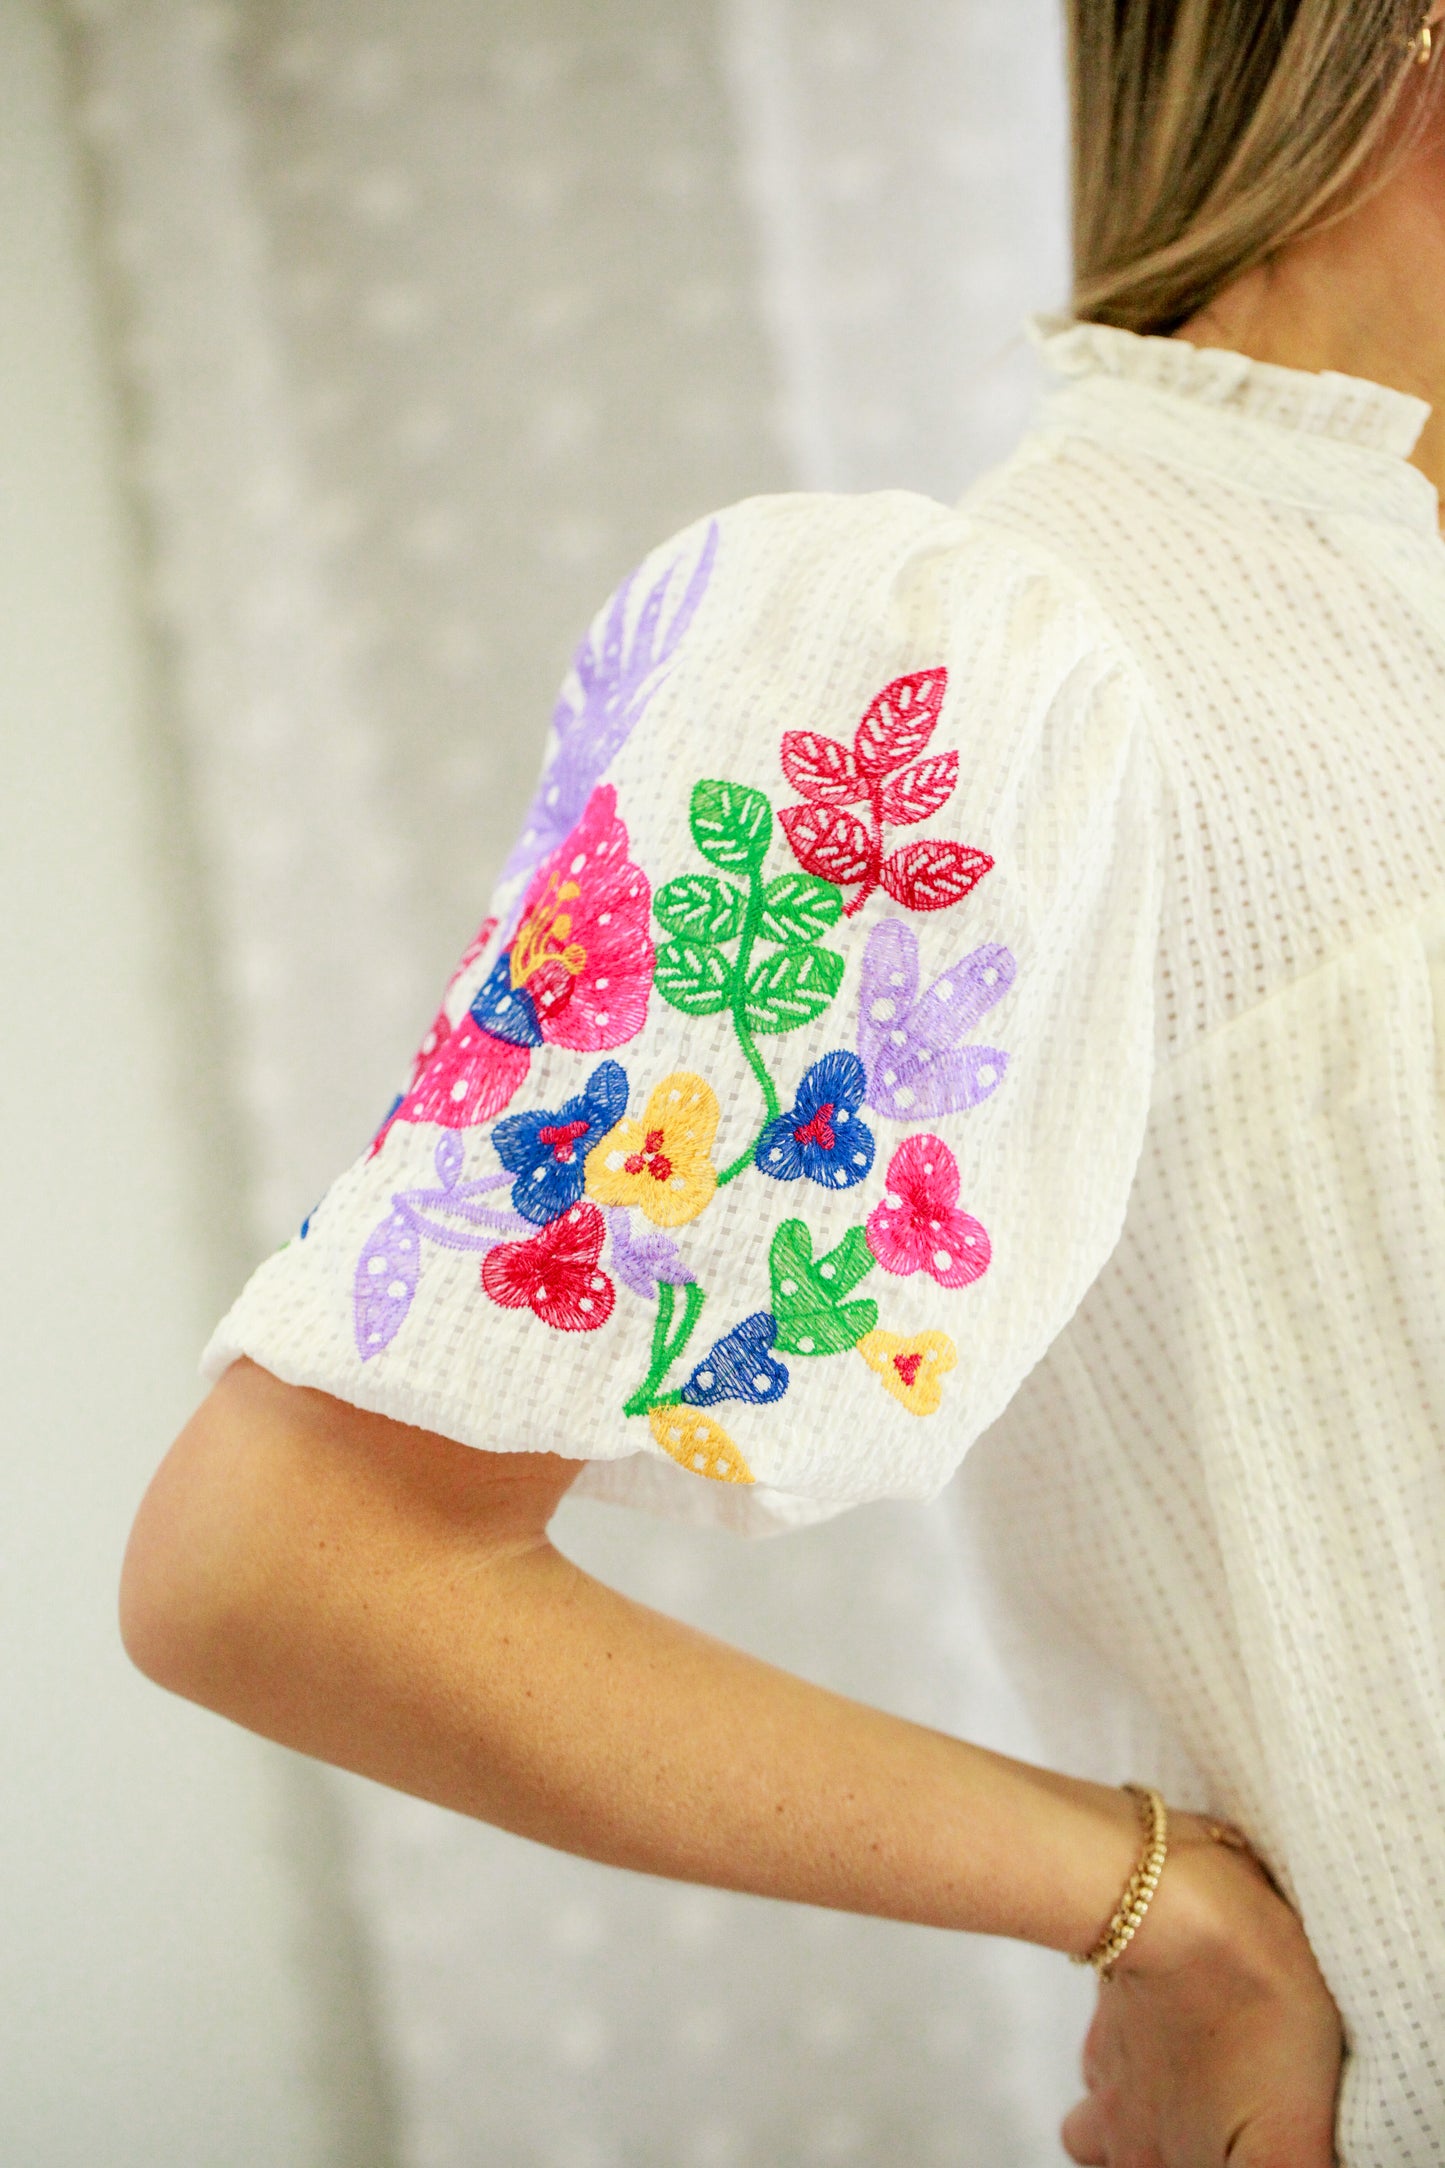 Bubble Sleeve Embroidered Top